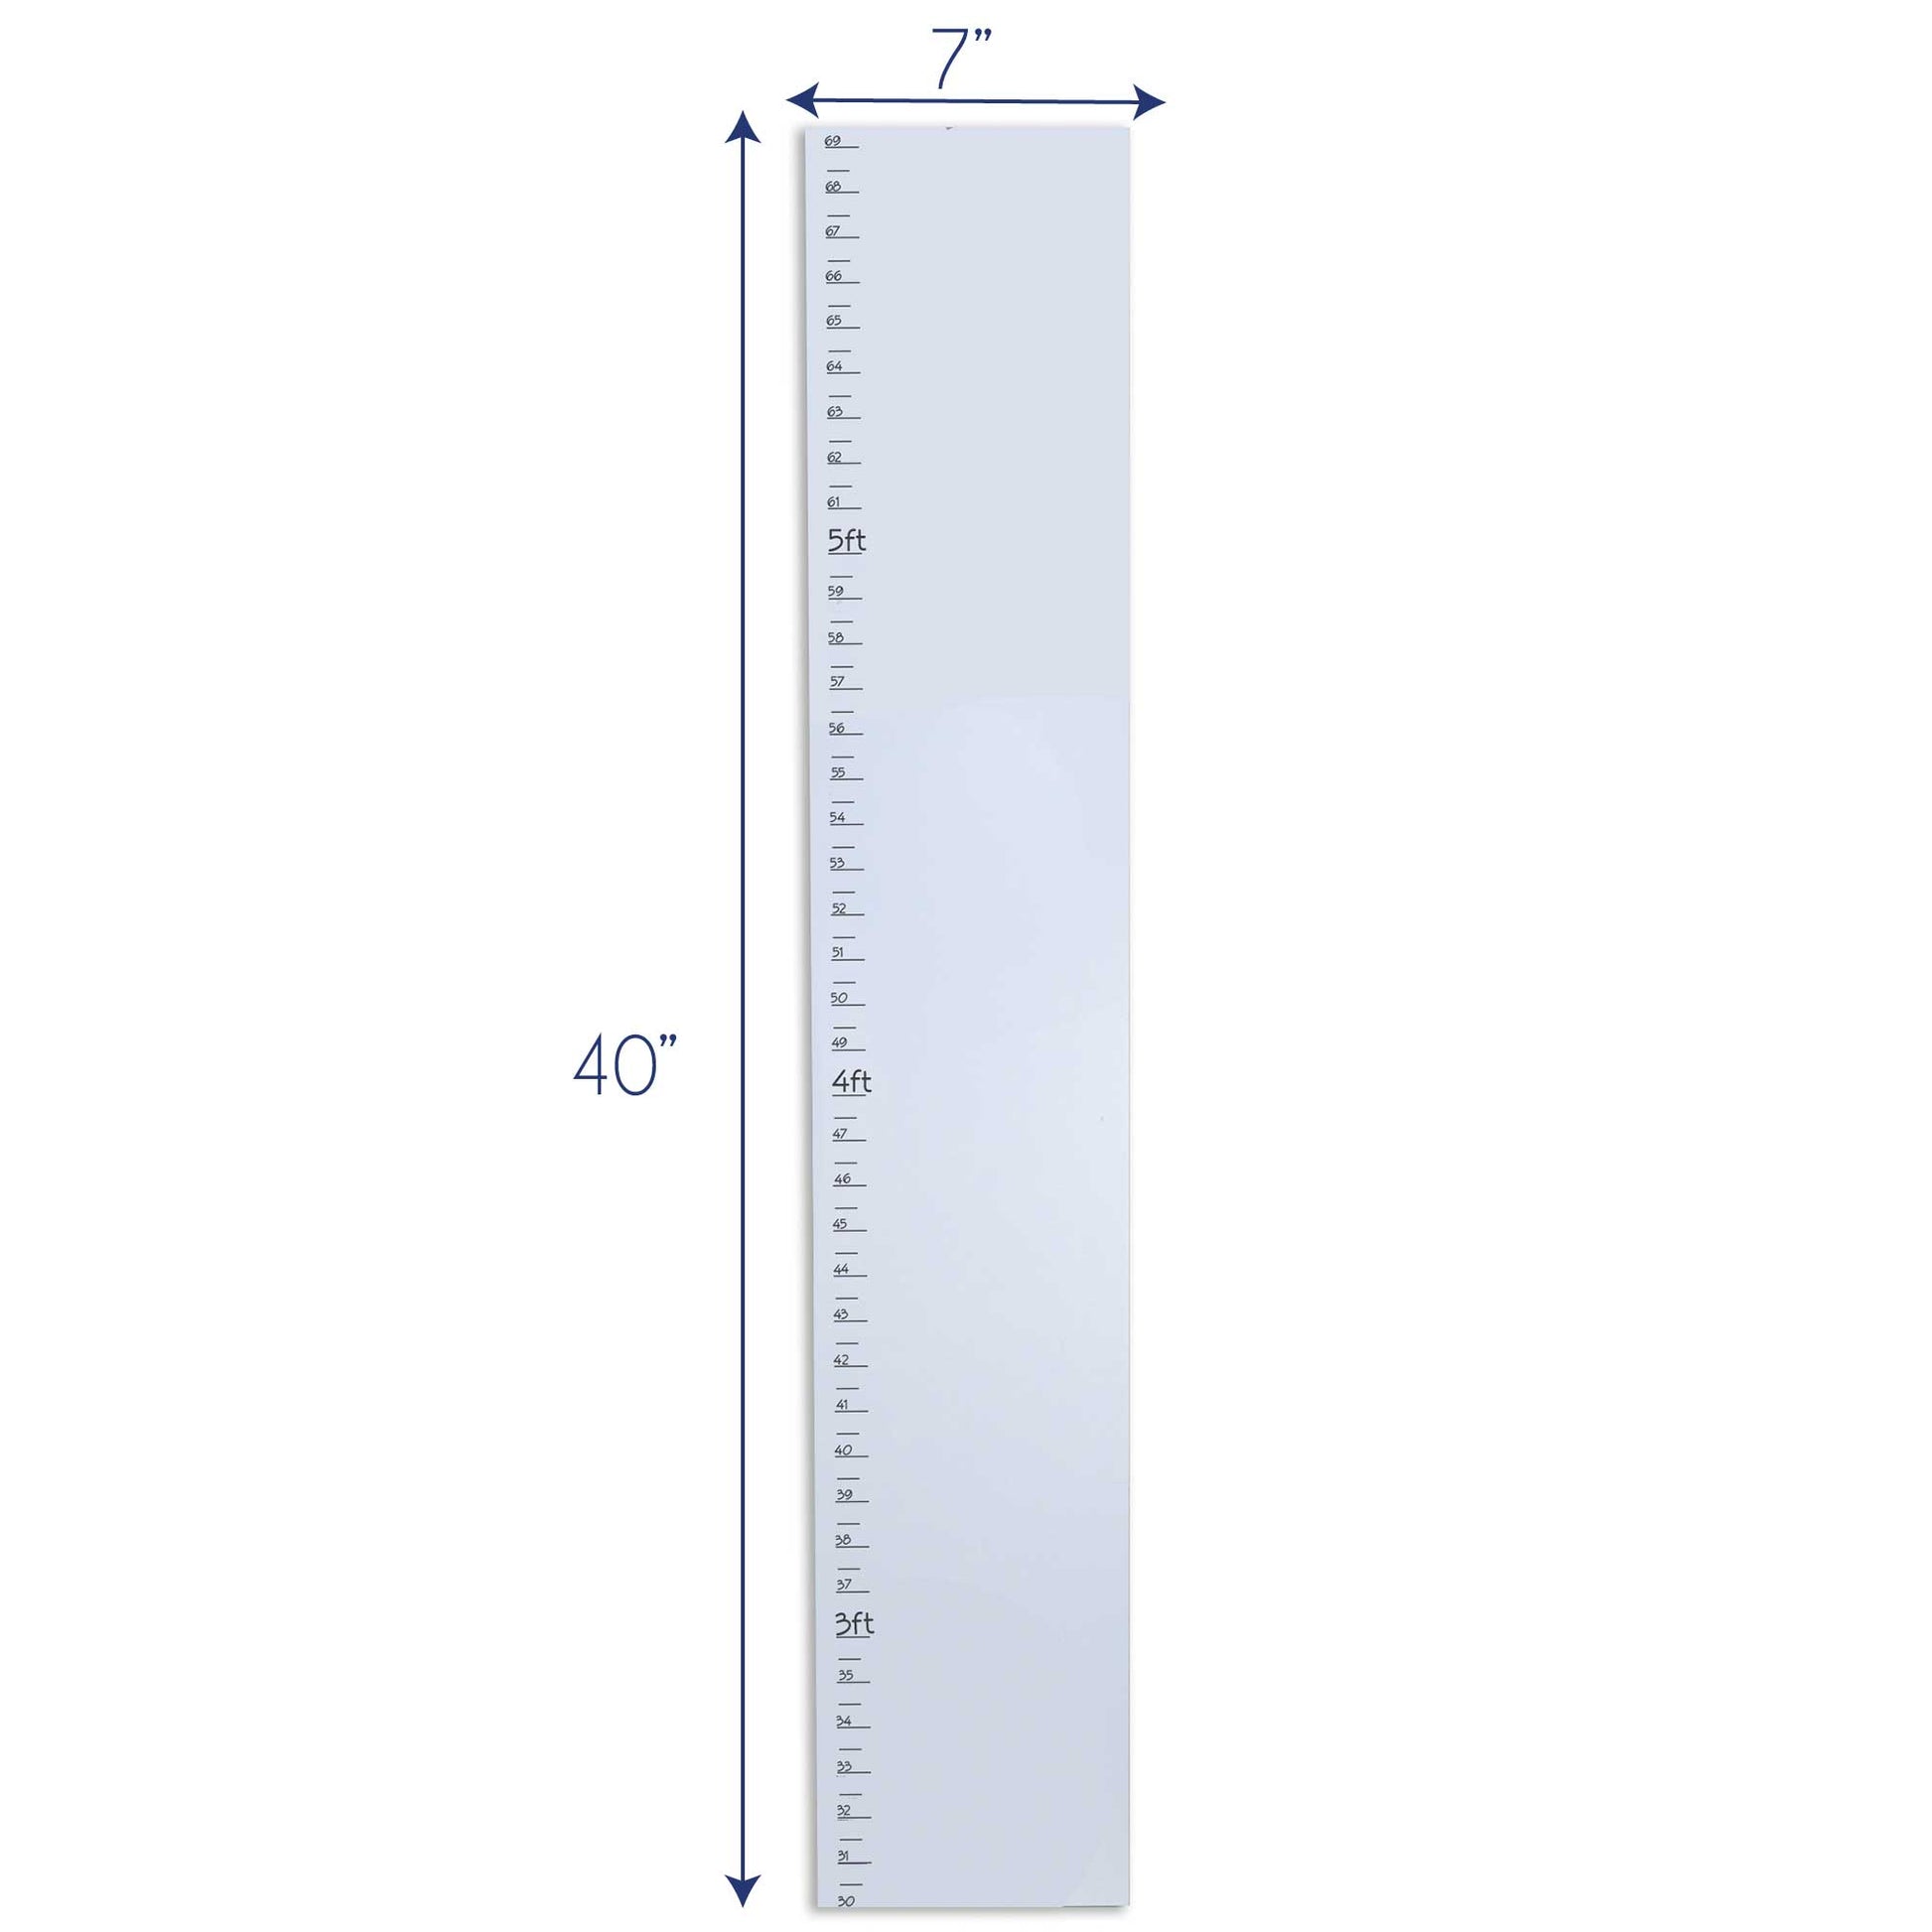 Personalized White Growth Chart With Soccer Design